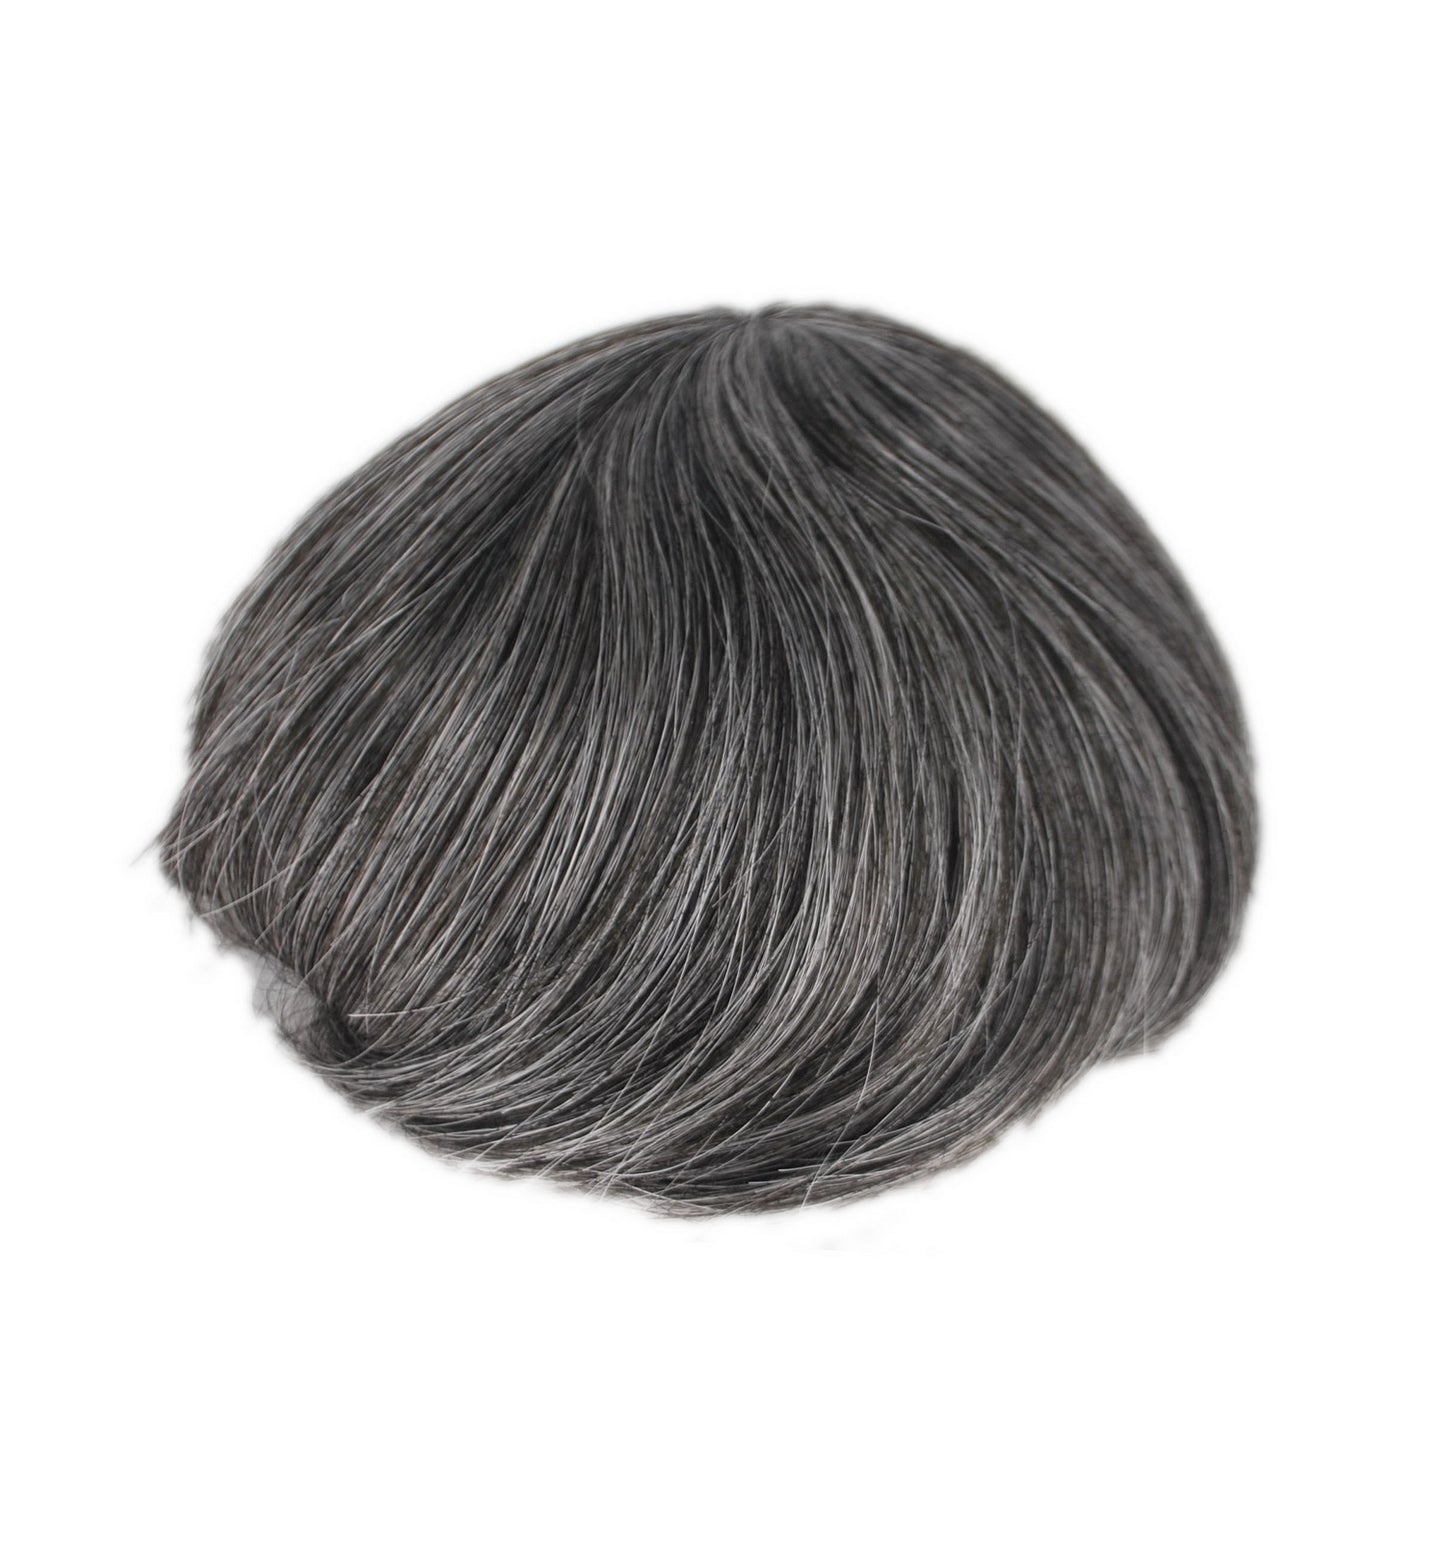 Full Lace Natural Black Mixed Grey Hair System 1B40 PU With Lace Toupee For Men